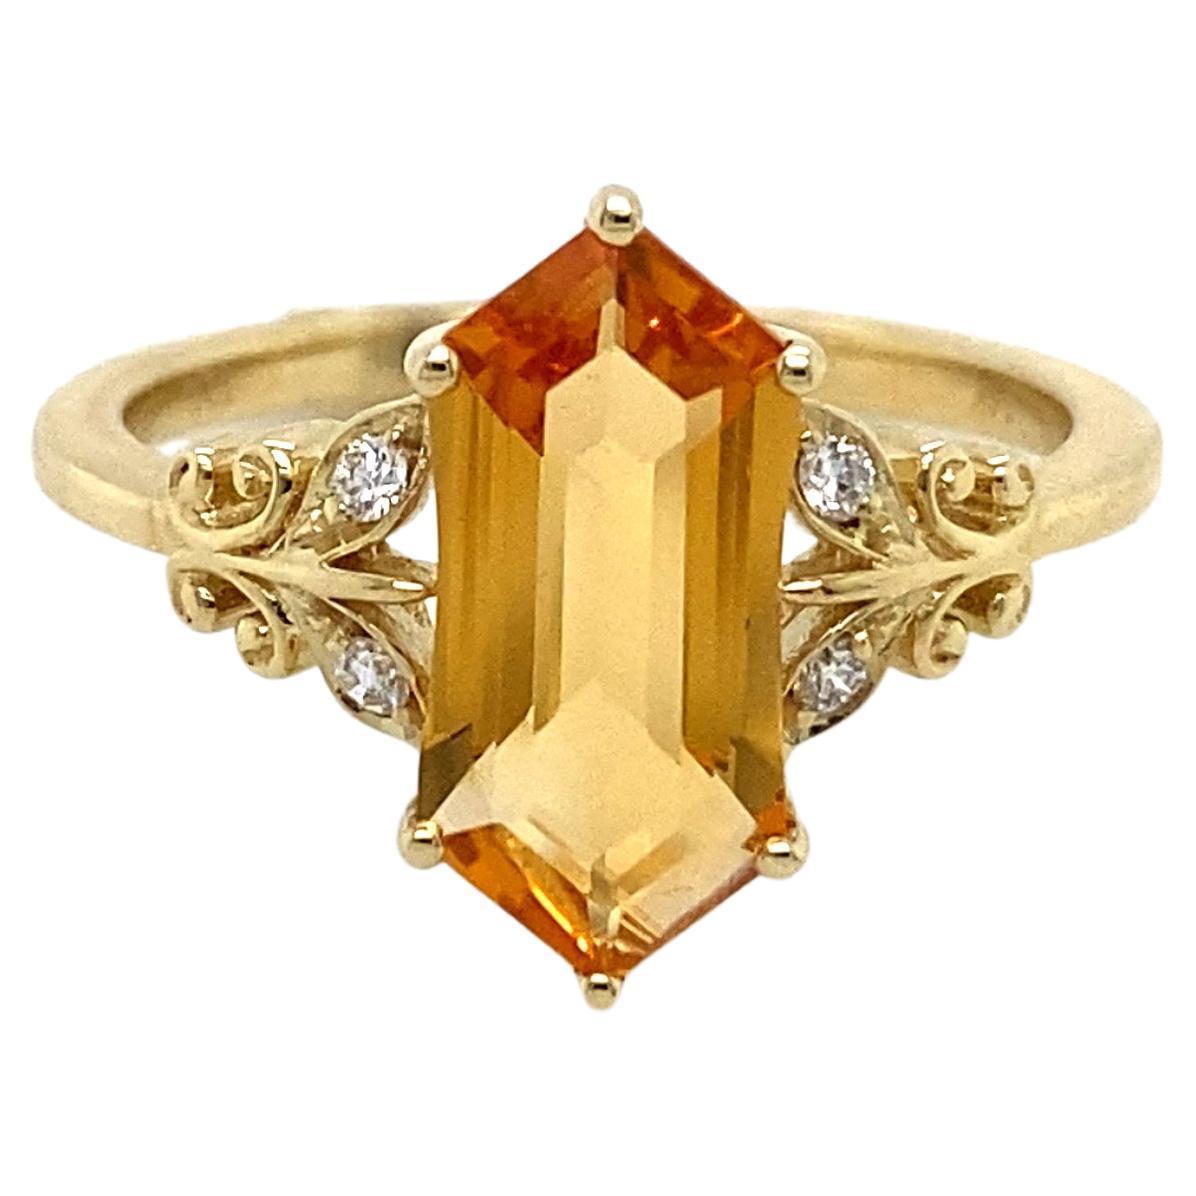 Hexagonal Citrine Ring with Diamonds and 6 Sides 2.15 Carat Total Weight